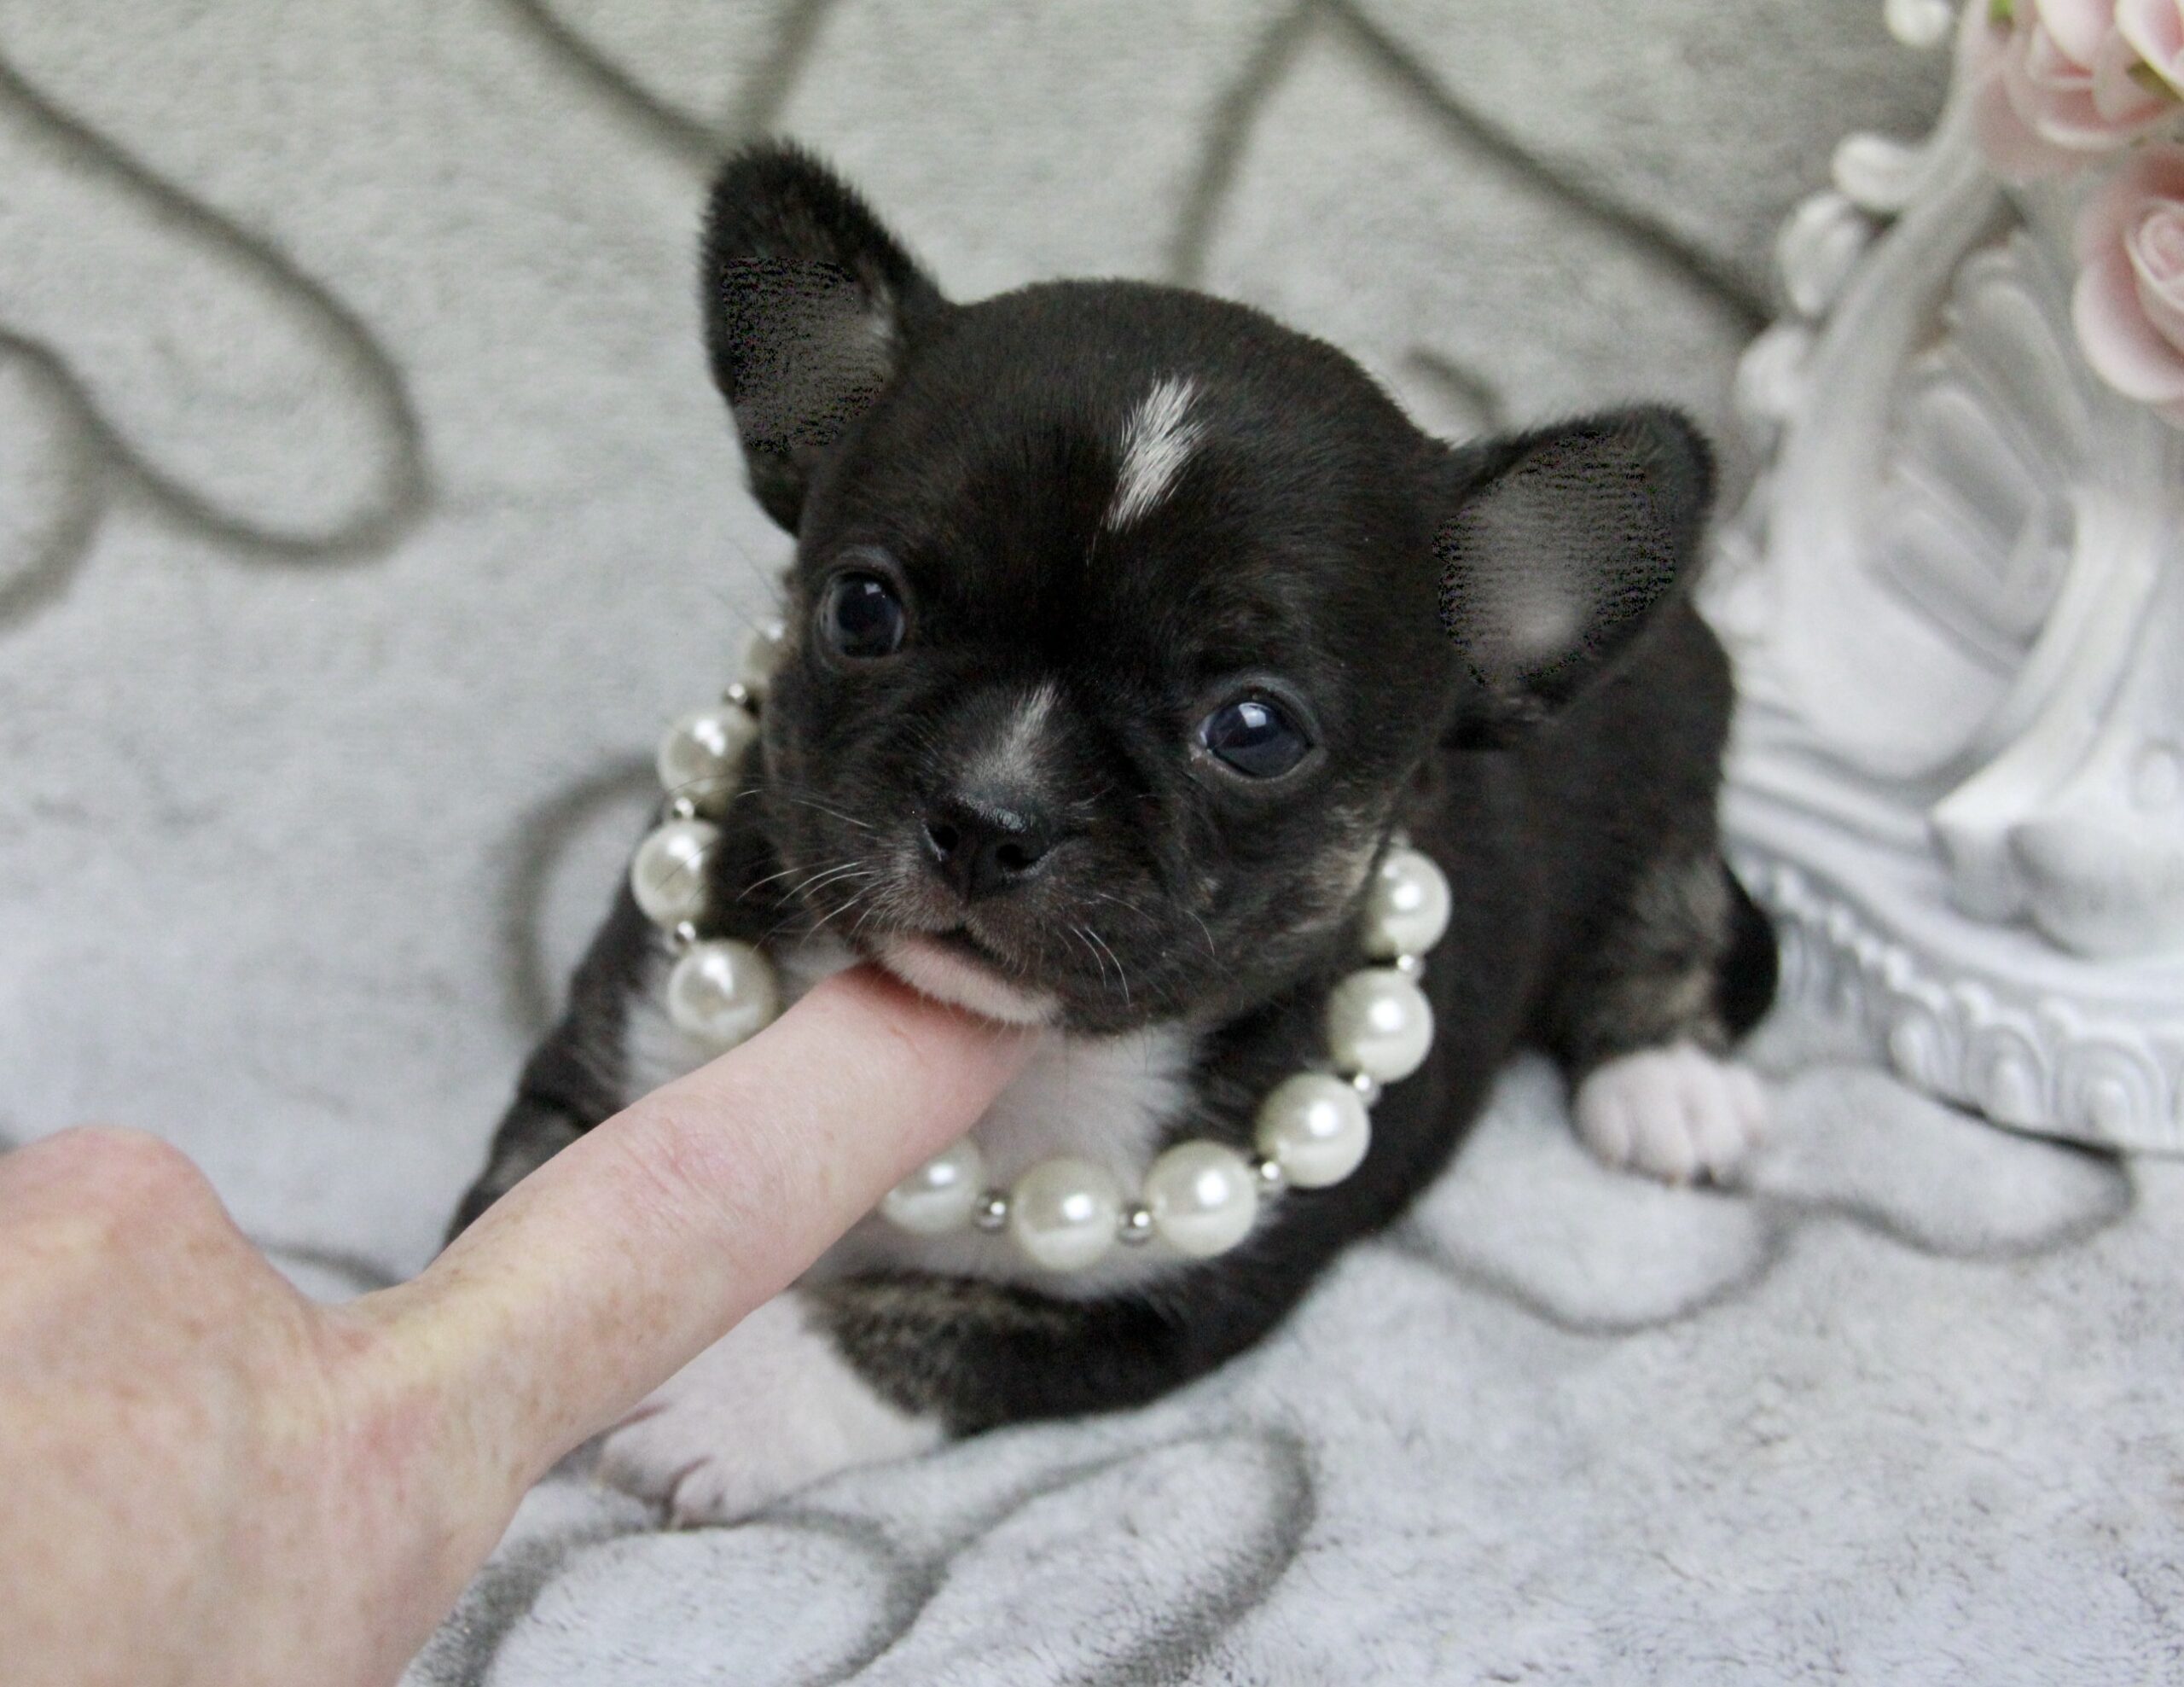 Chihuahua poil court femelle ==DISPONIBLE==